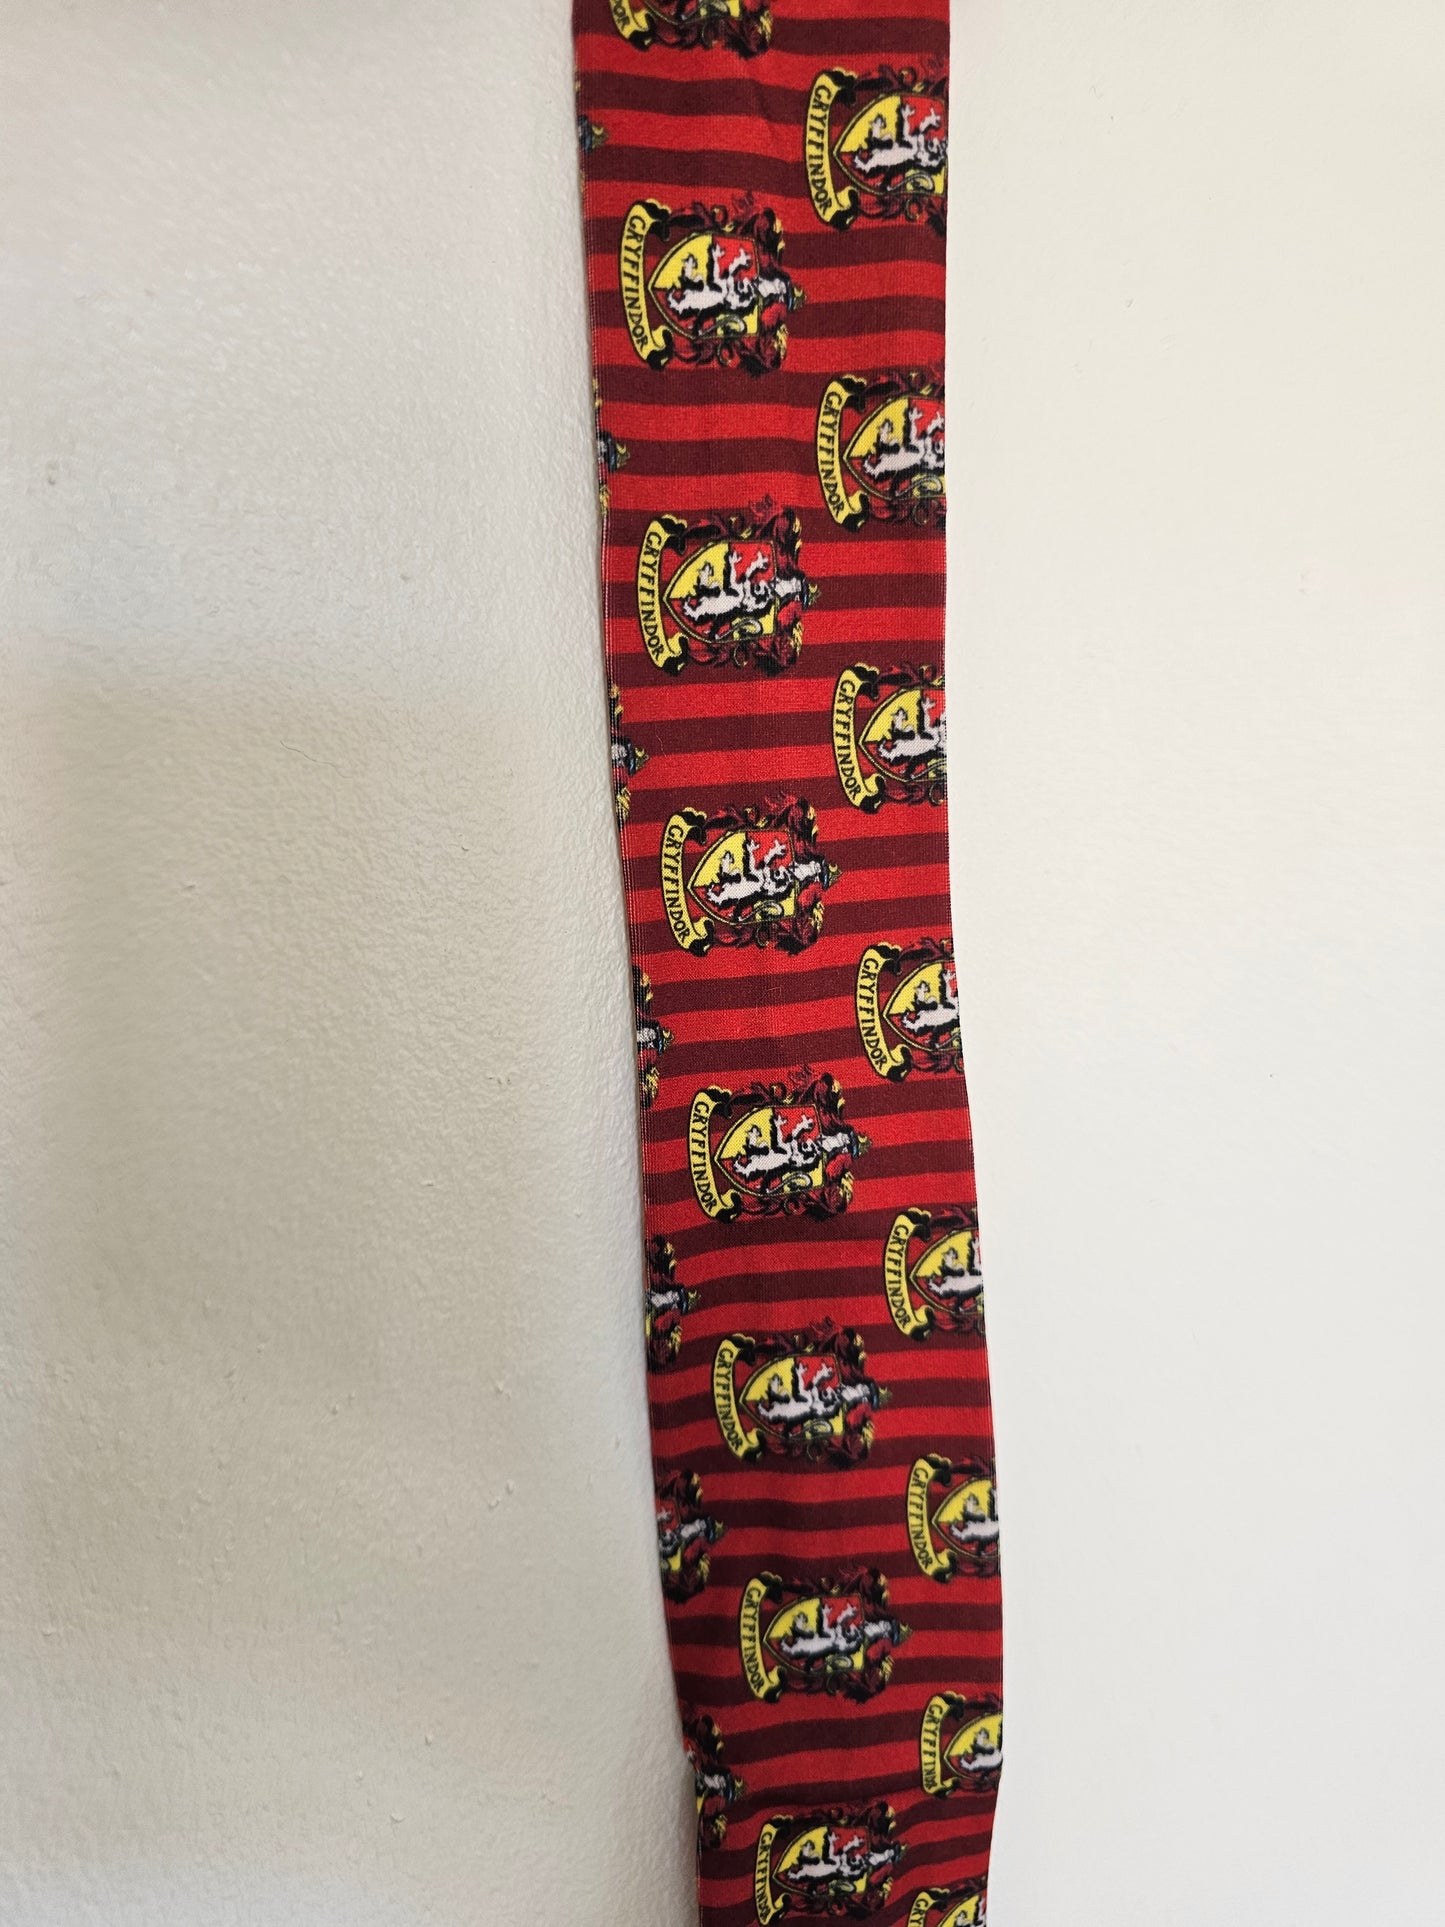 Harry Potter shoe strap covers